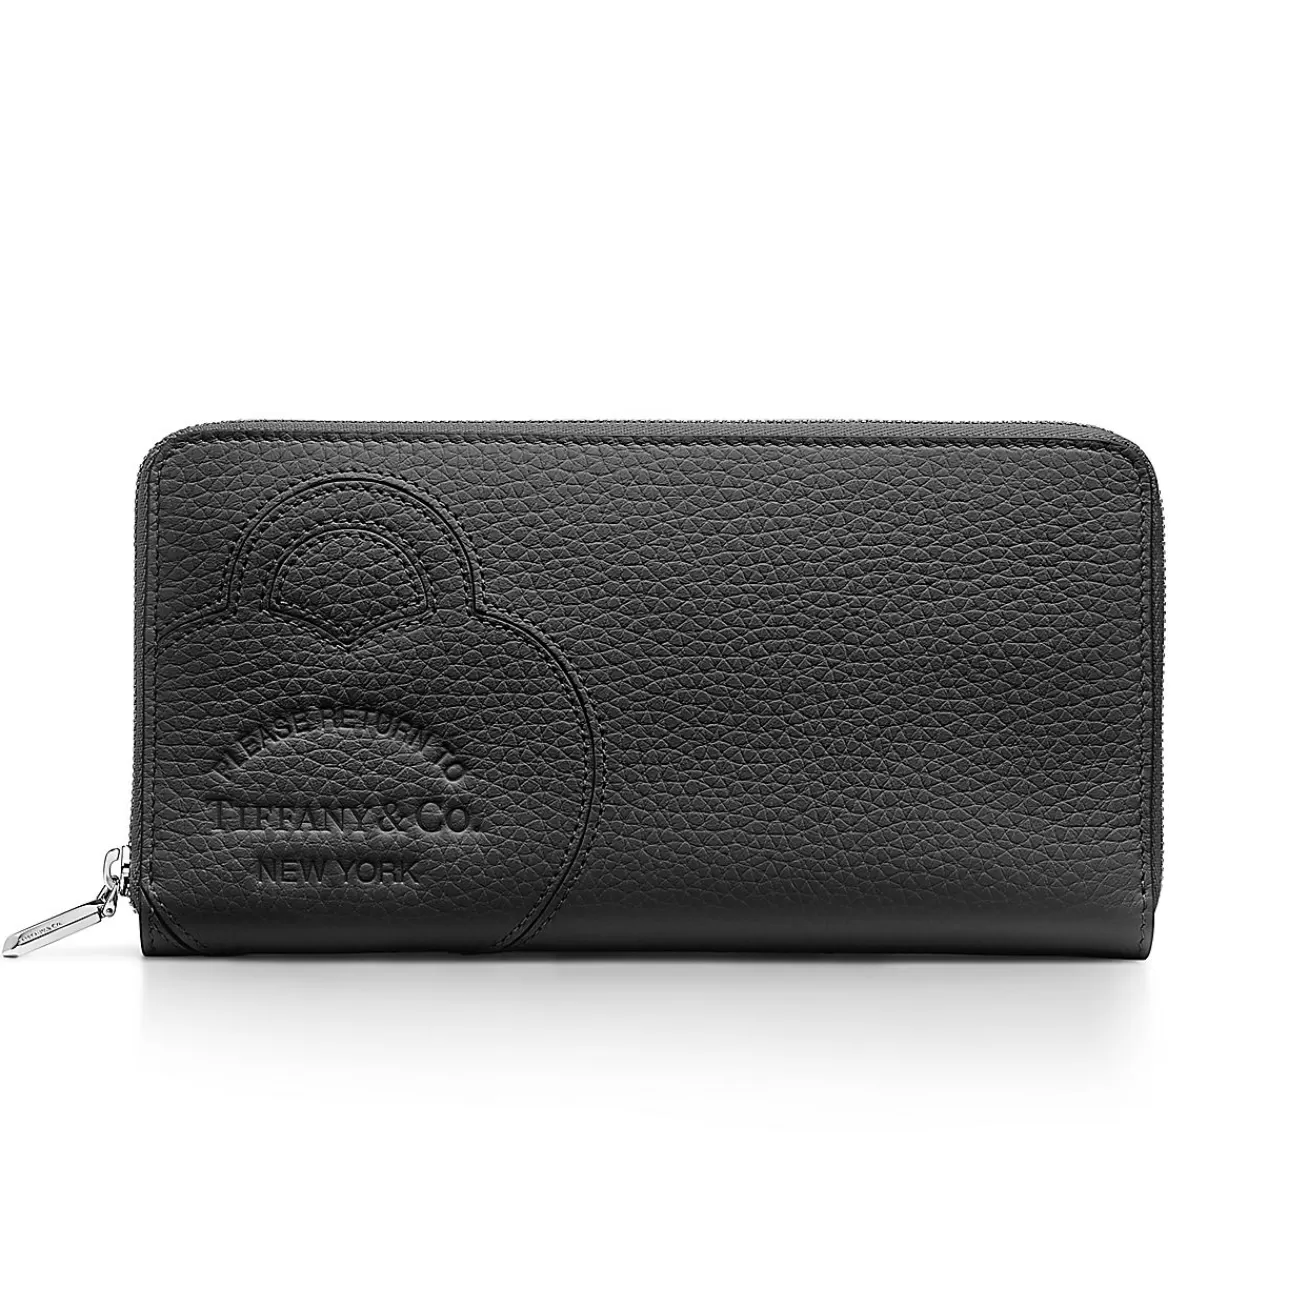 Tiffany & Co. Return to Tiffany® Large Zip Wallet in Black Leather | ^Women Small Leather Goods | Women's Accessories